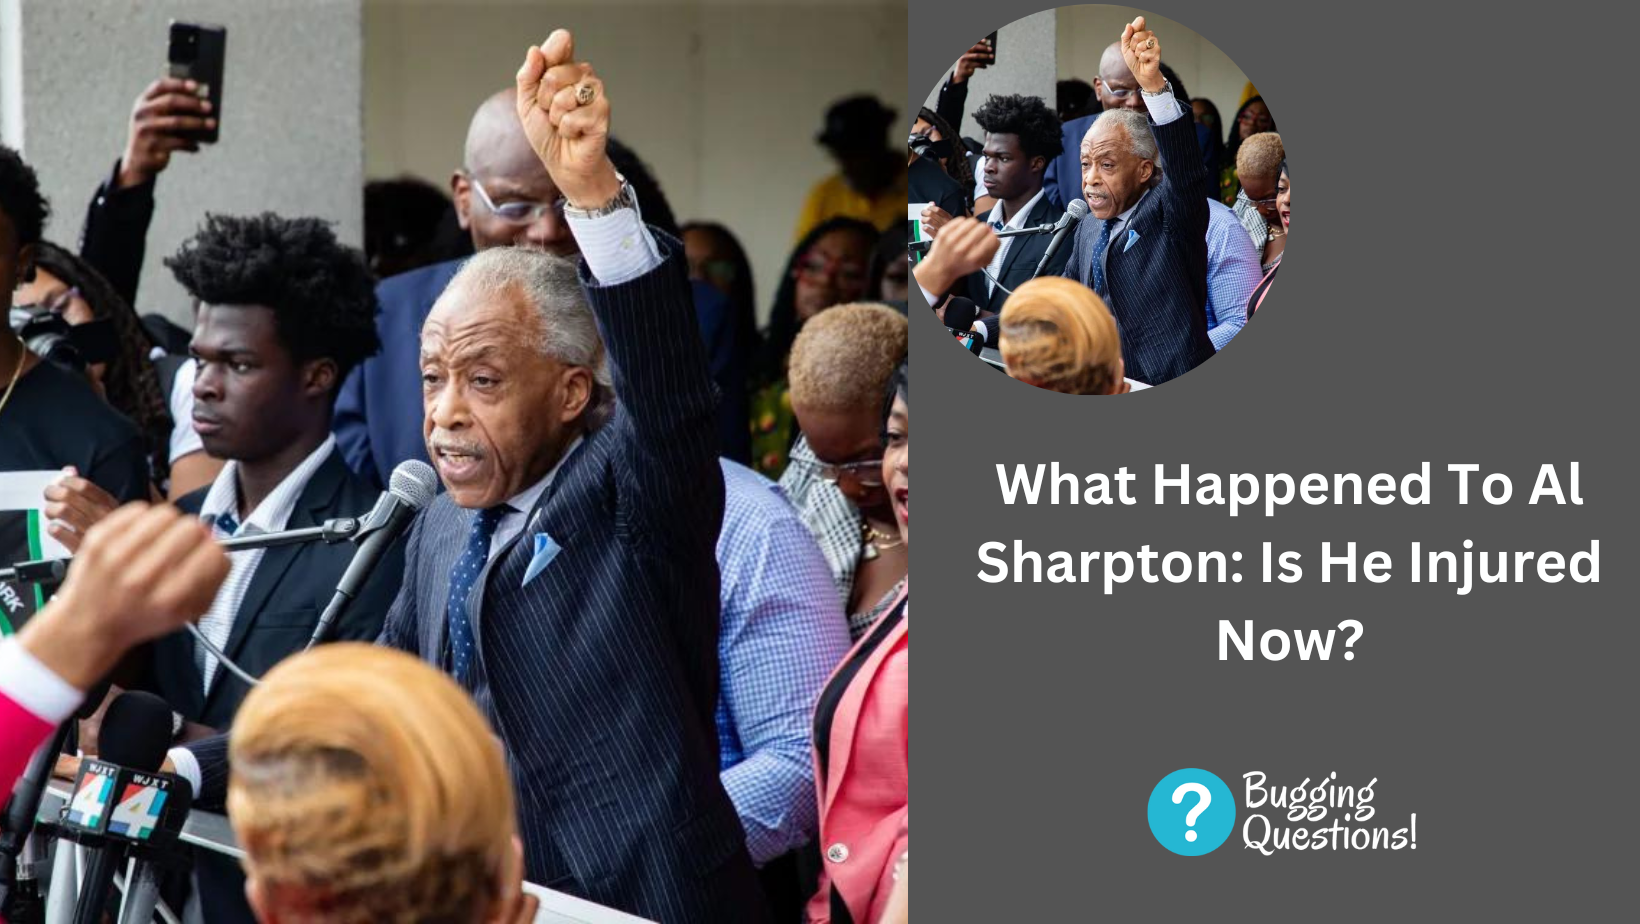 What Happened To Al Sharpton: Is He Injured Now?